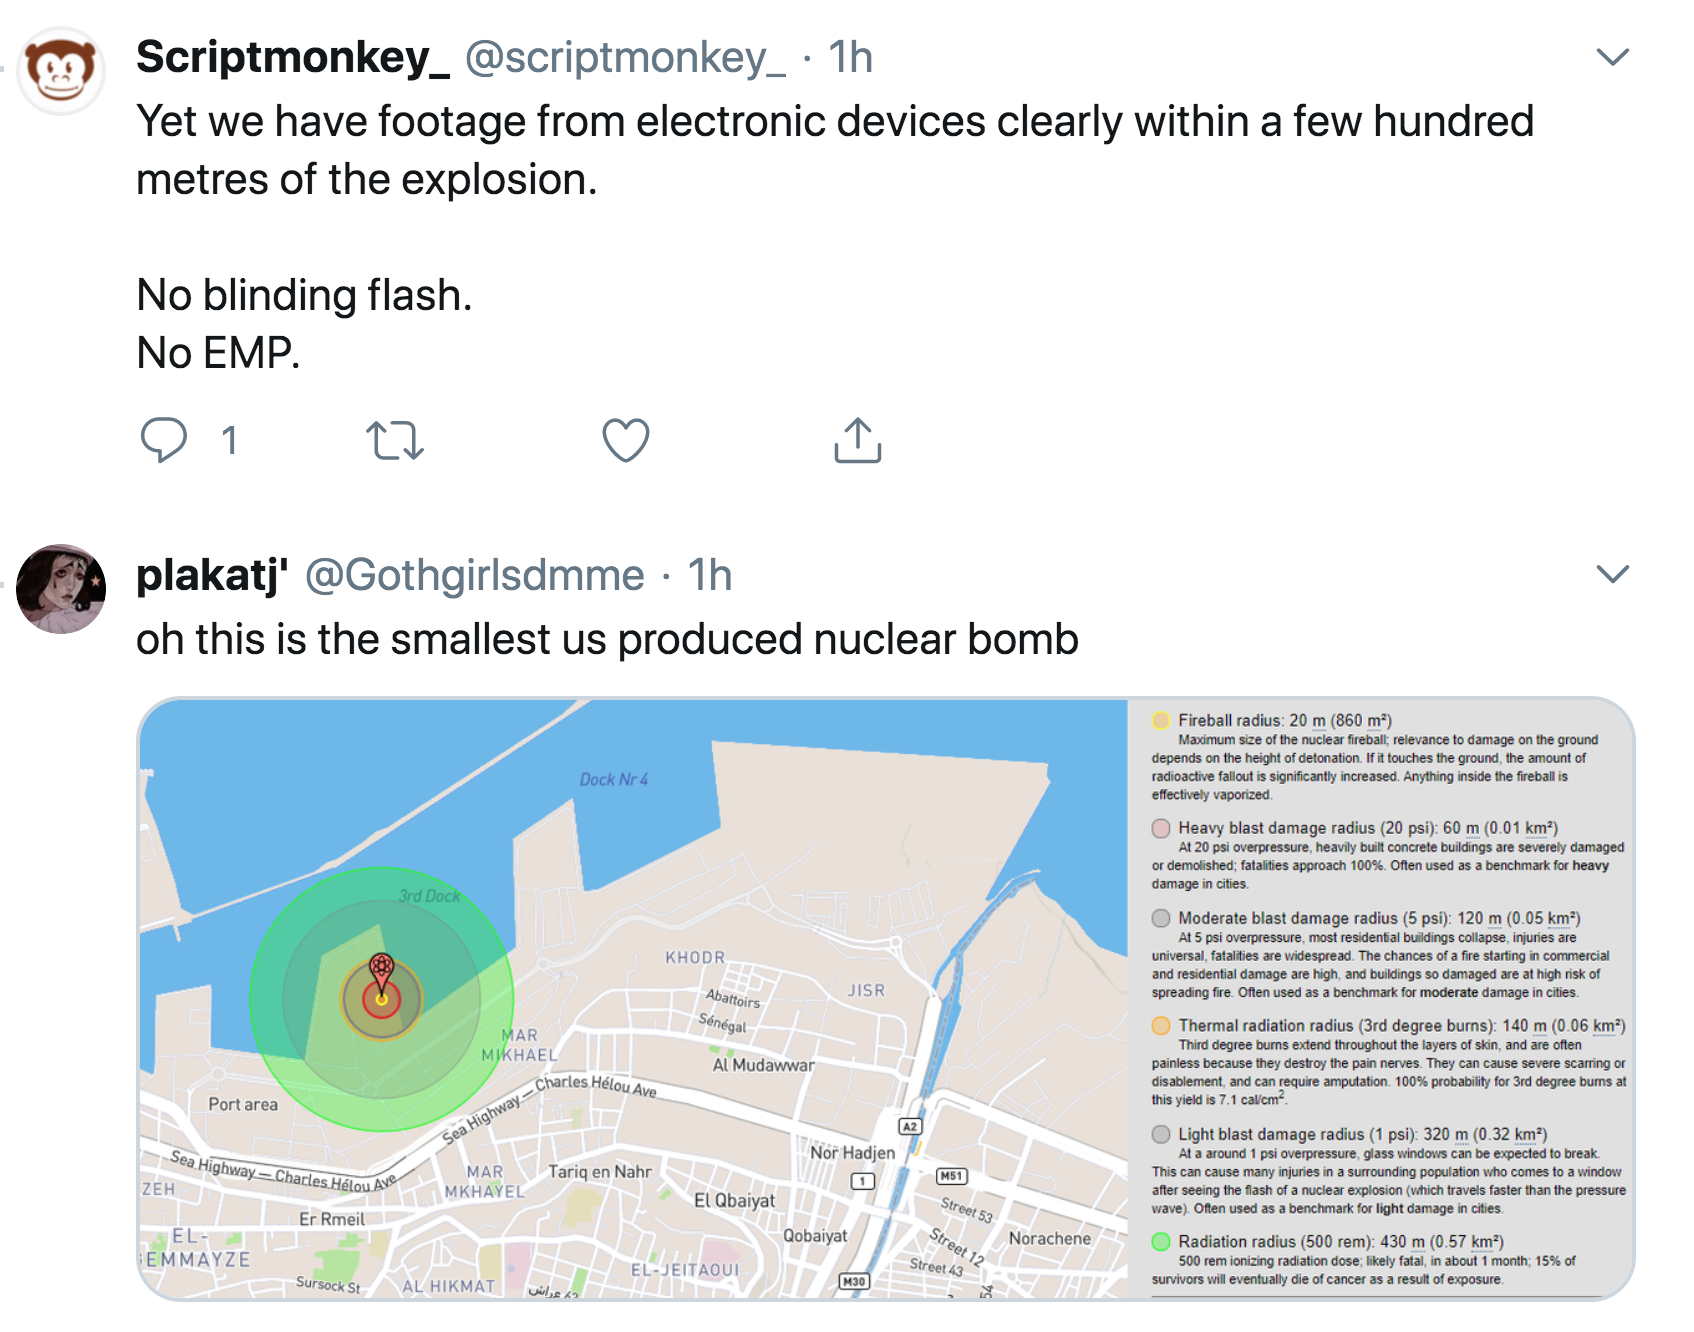 diagram - Scriptmonkey_ Yet we have footage from electronic devices clearly within a few hundred metres of the explosion. No blinding flash No Emp. 1 plakati' . 1h oh this is the smallest us produced nuclear bomb Firebolus 20 50 Mama the bouche en the whe